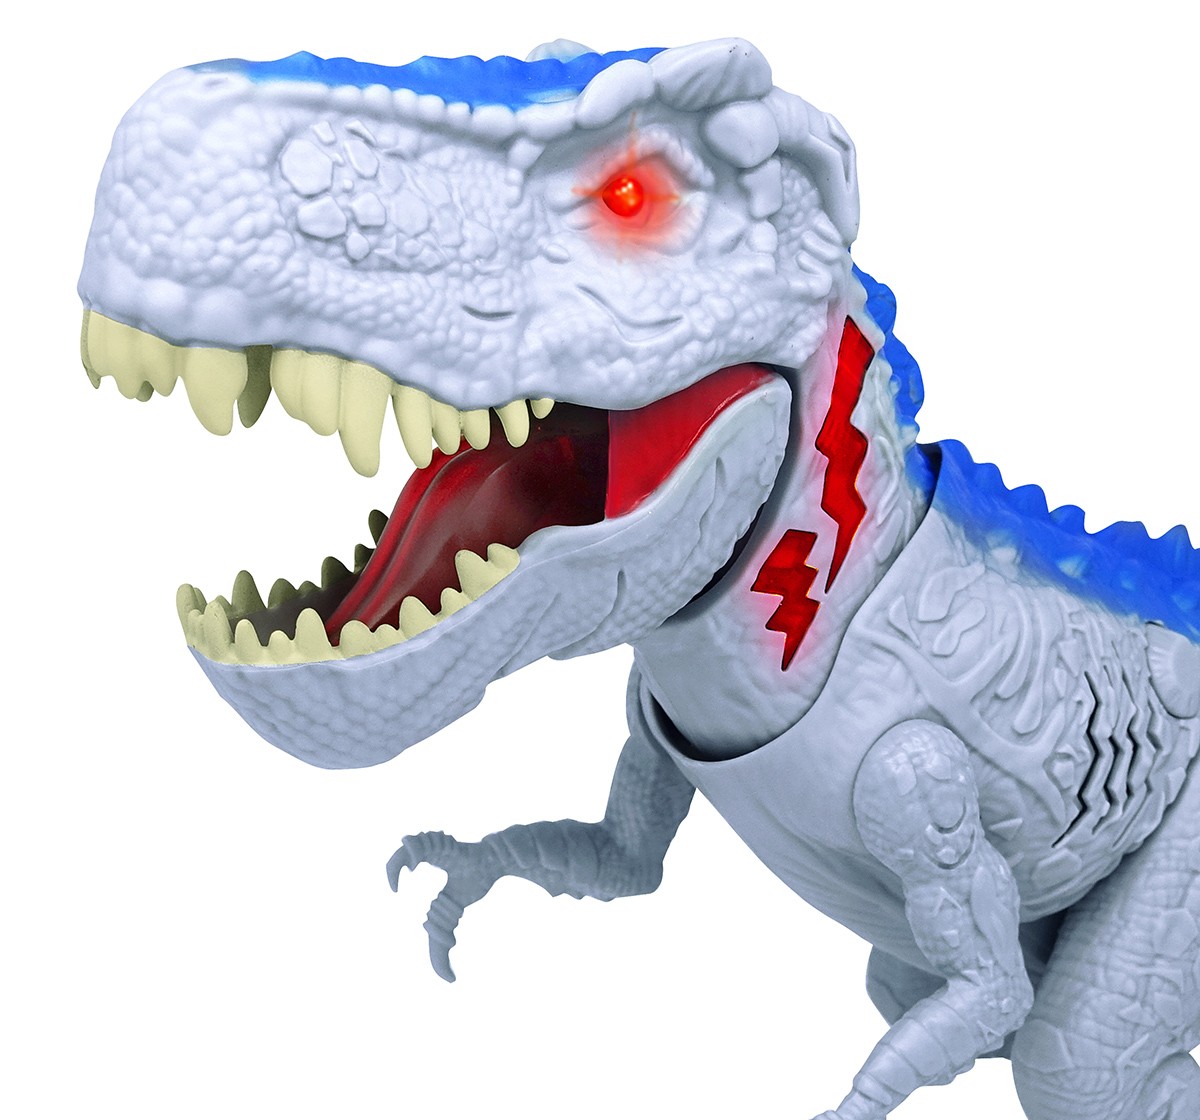 Dragon I Chomping and Walking T-Rex Large Electronic Dinosaur Toys for Kids 3Y+, Multicolour